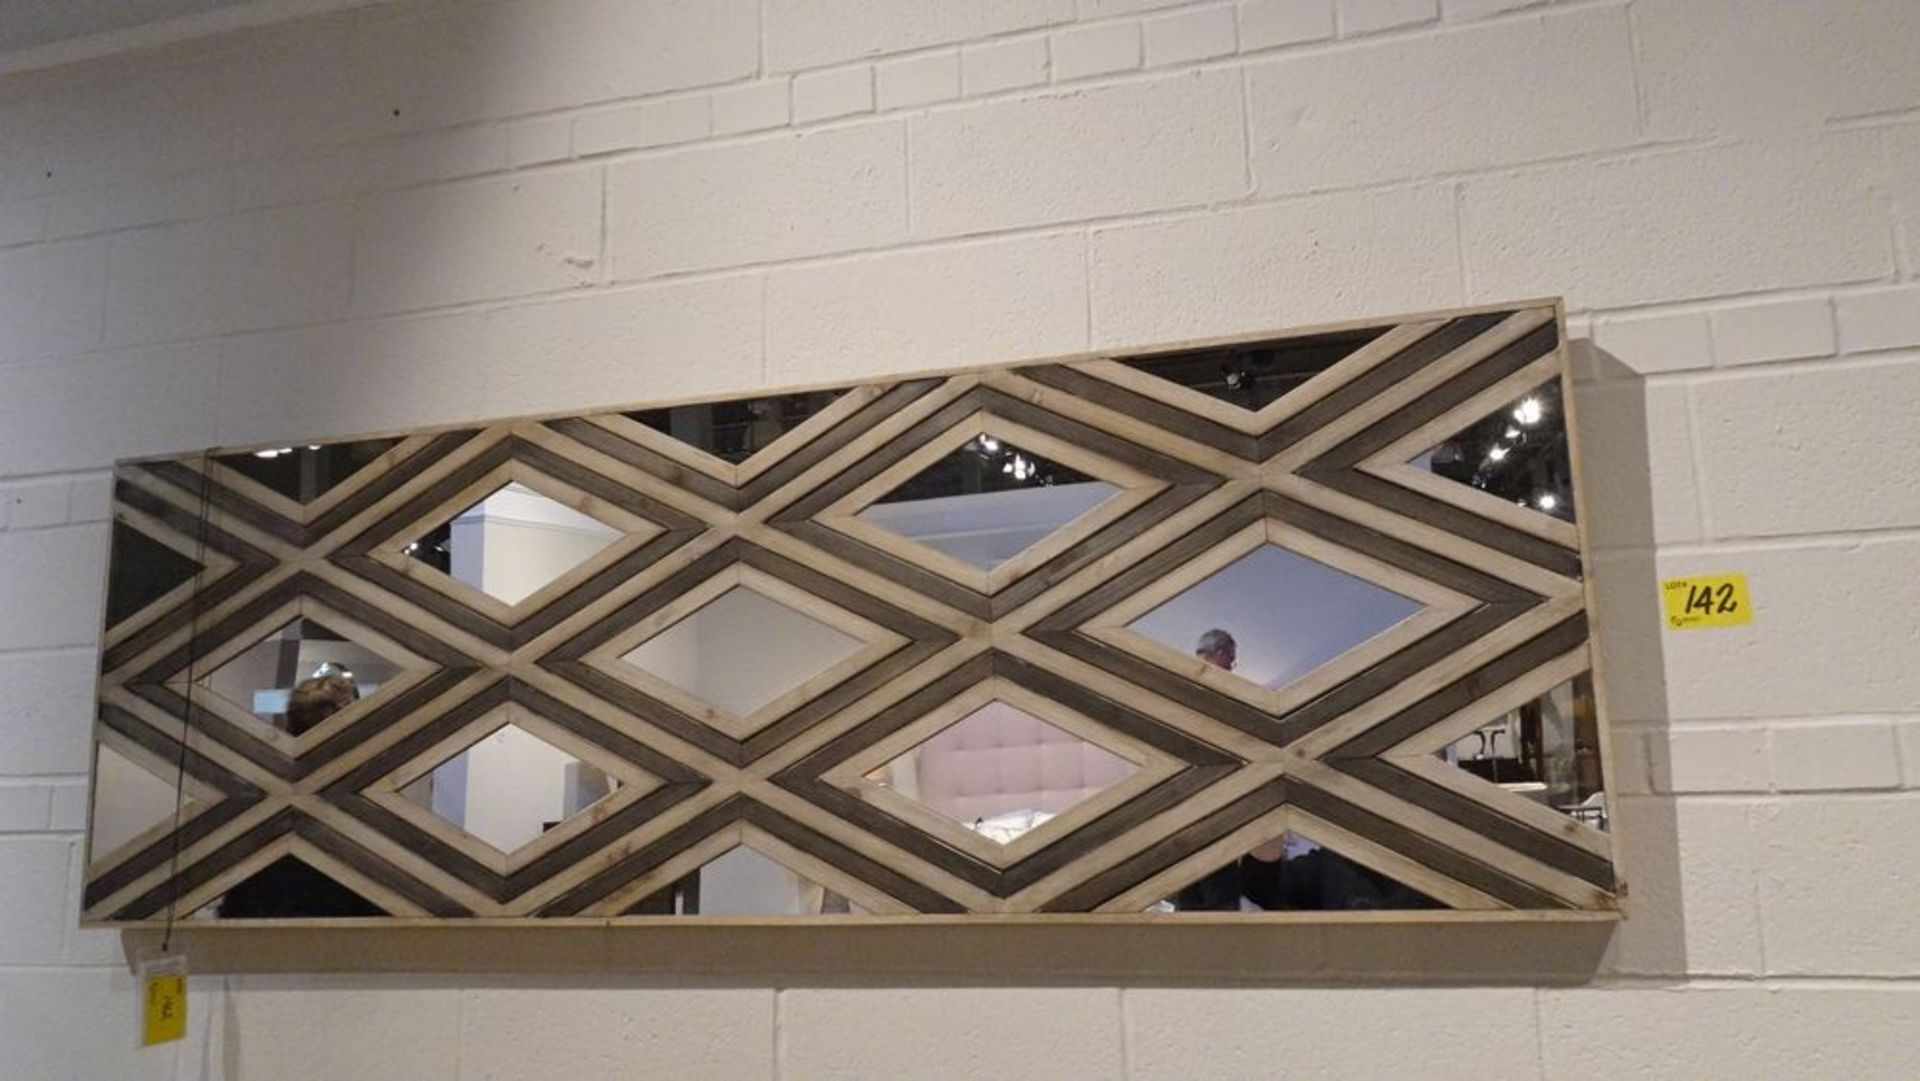 GRACE FEYOCK - PATTERNED WOOD AND MIRROR PIECE (MSRP $480)